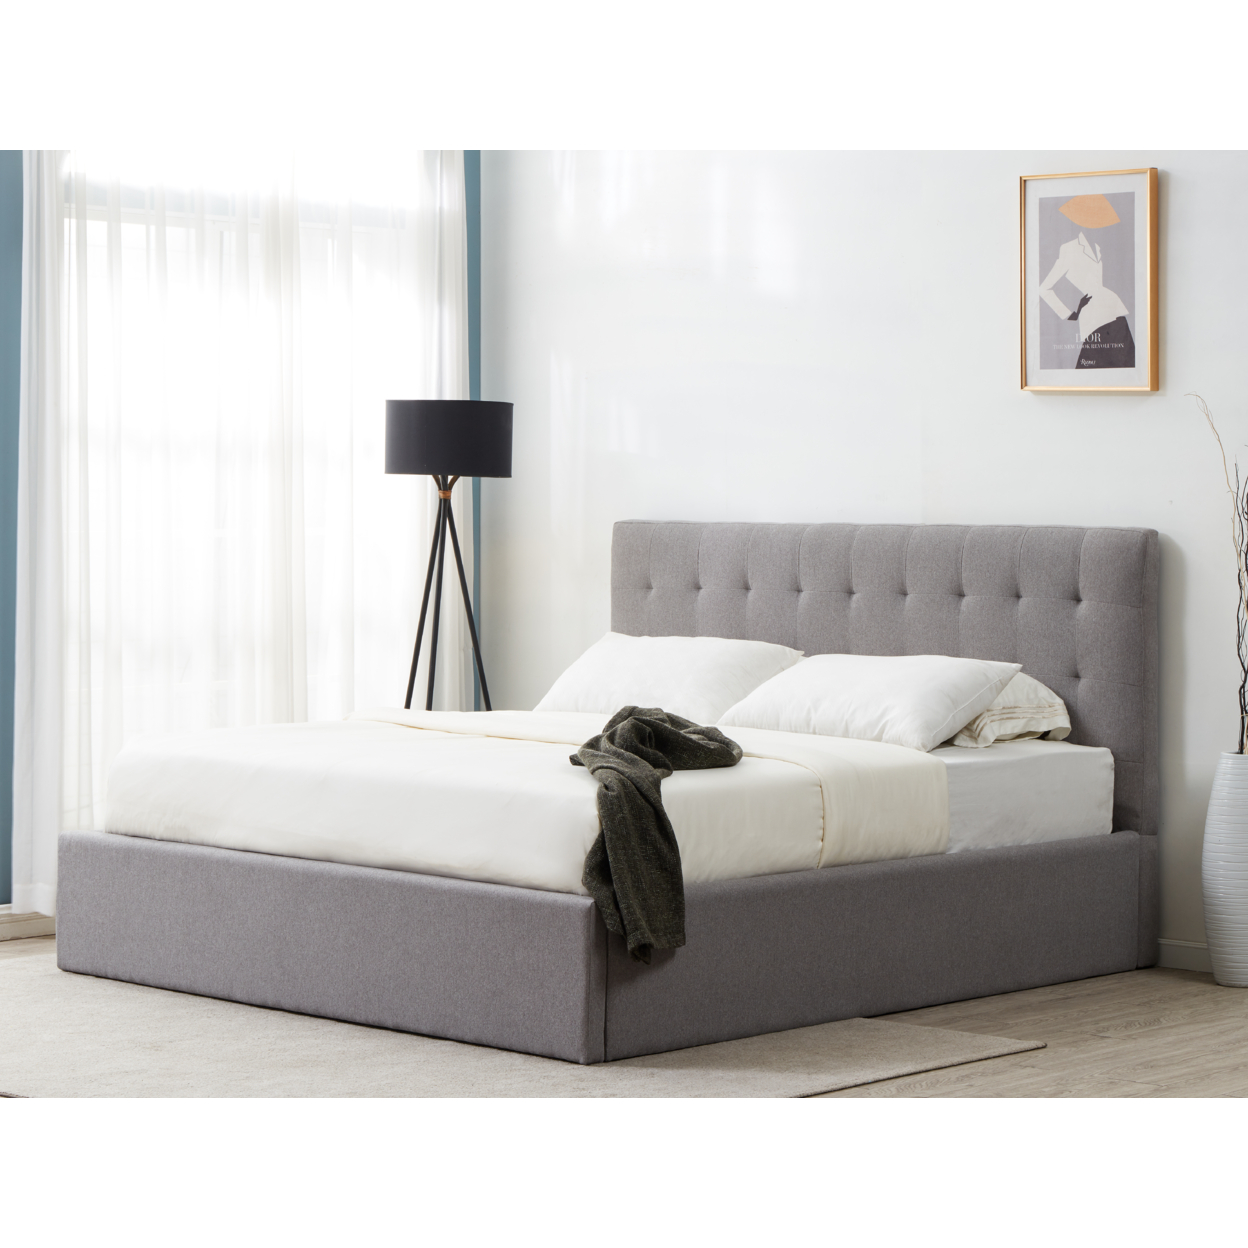 SAFAVIEH COUTURE ROSITA LOW PROFILE TUFTED BED Light Grey